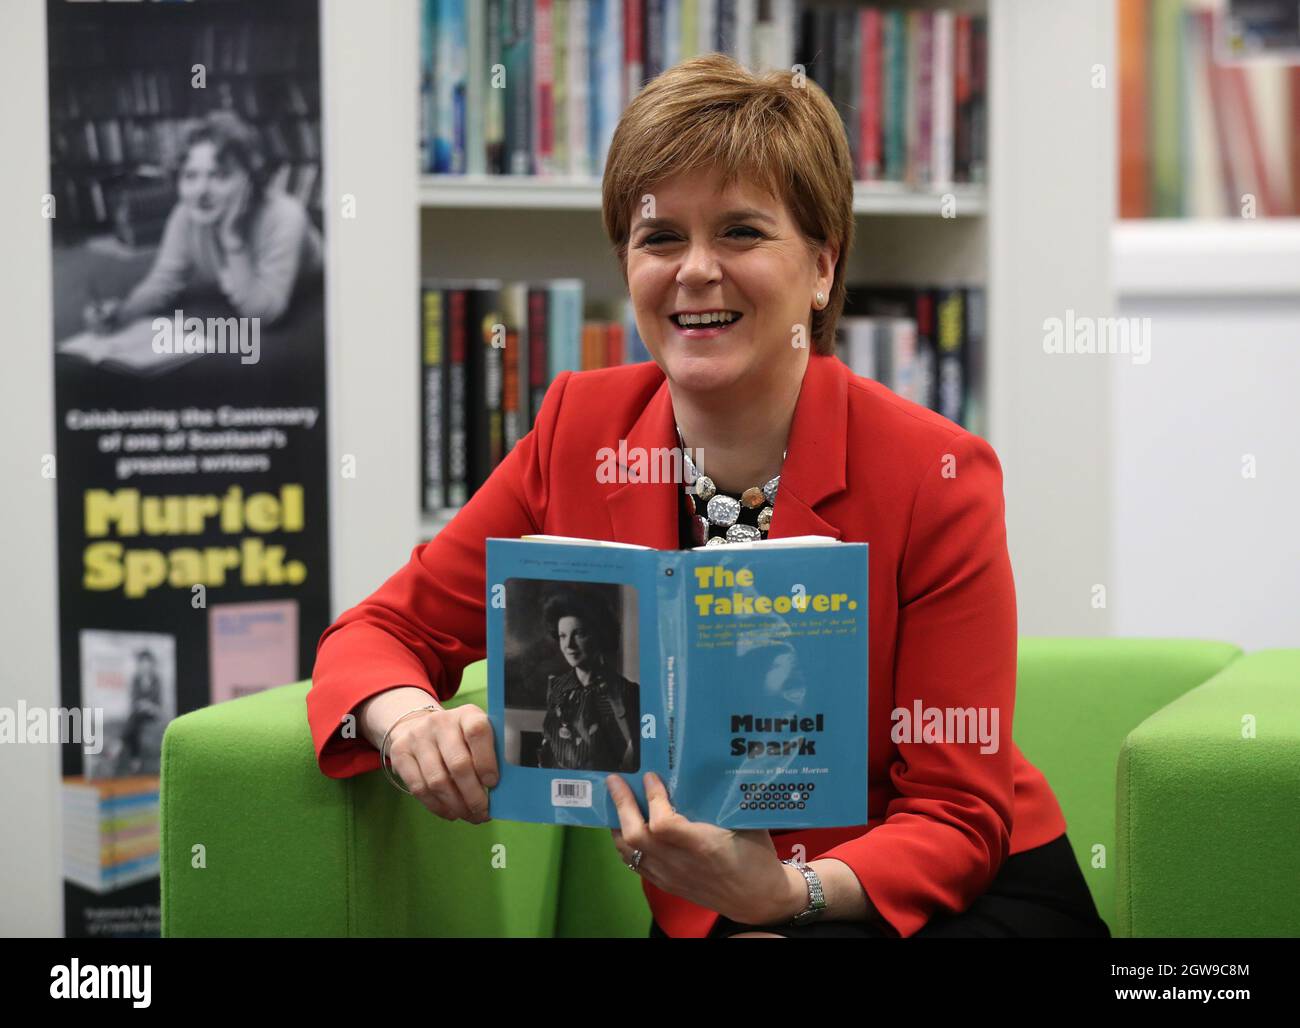 File photo dated 21/11/18 of First Minister of Scotland Nicola Sturgeon at a library. Scottish Labour have found spending on library services in Scotland has fallen by almost a fifth over the past decade and have said the 'SNP must stop gutting local authorities and act now to save Scotland's libraries.' Stock Photo